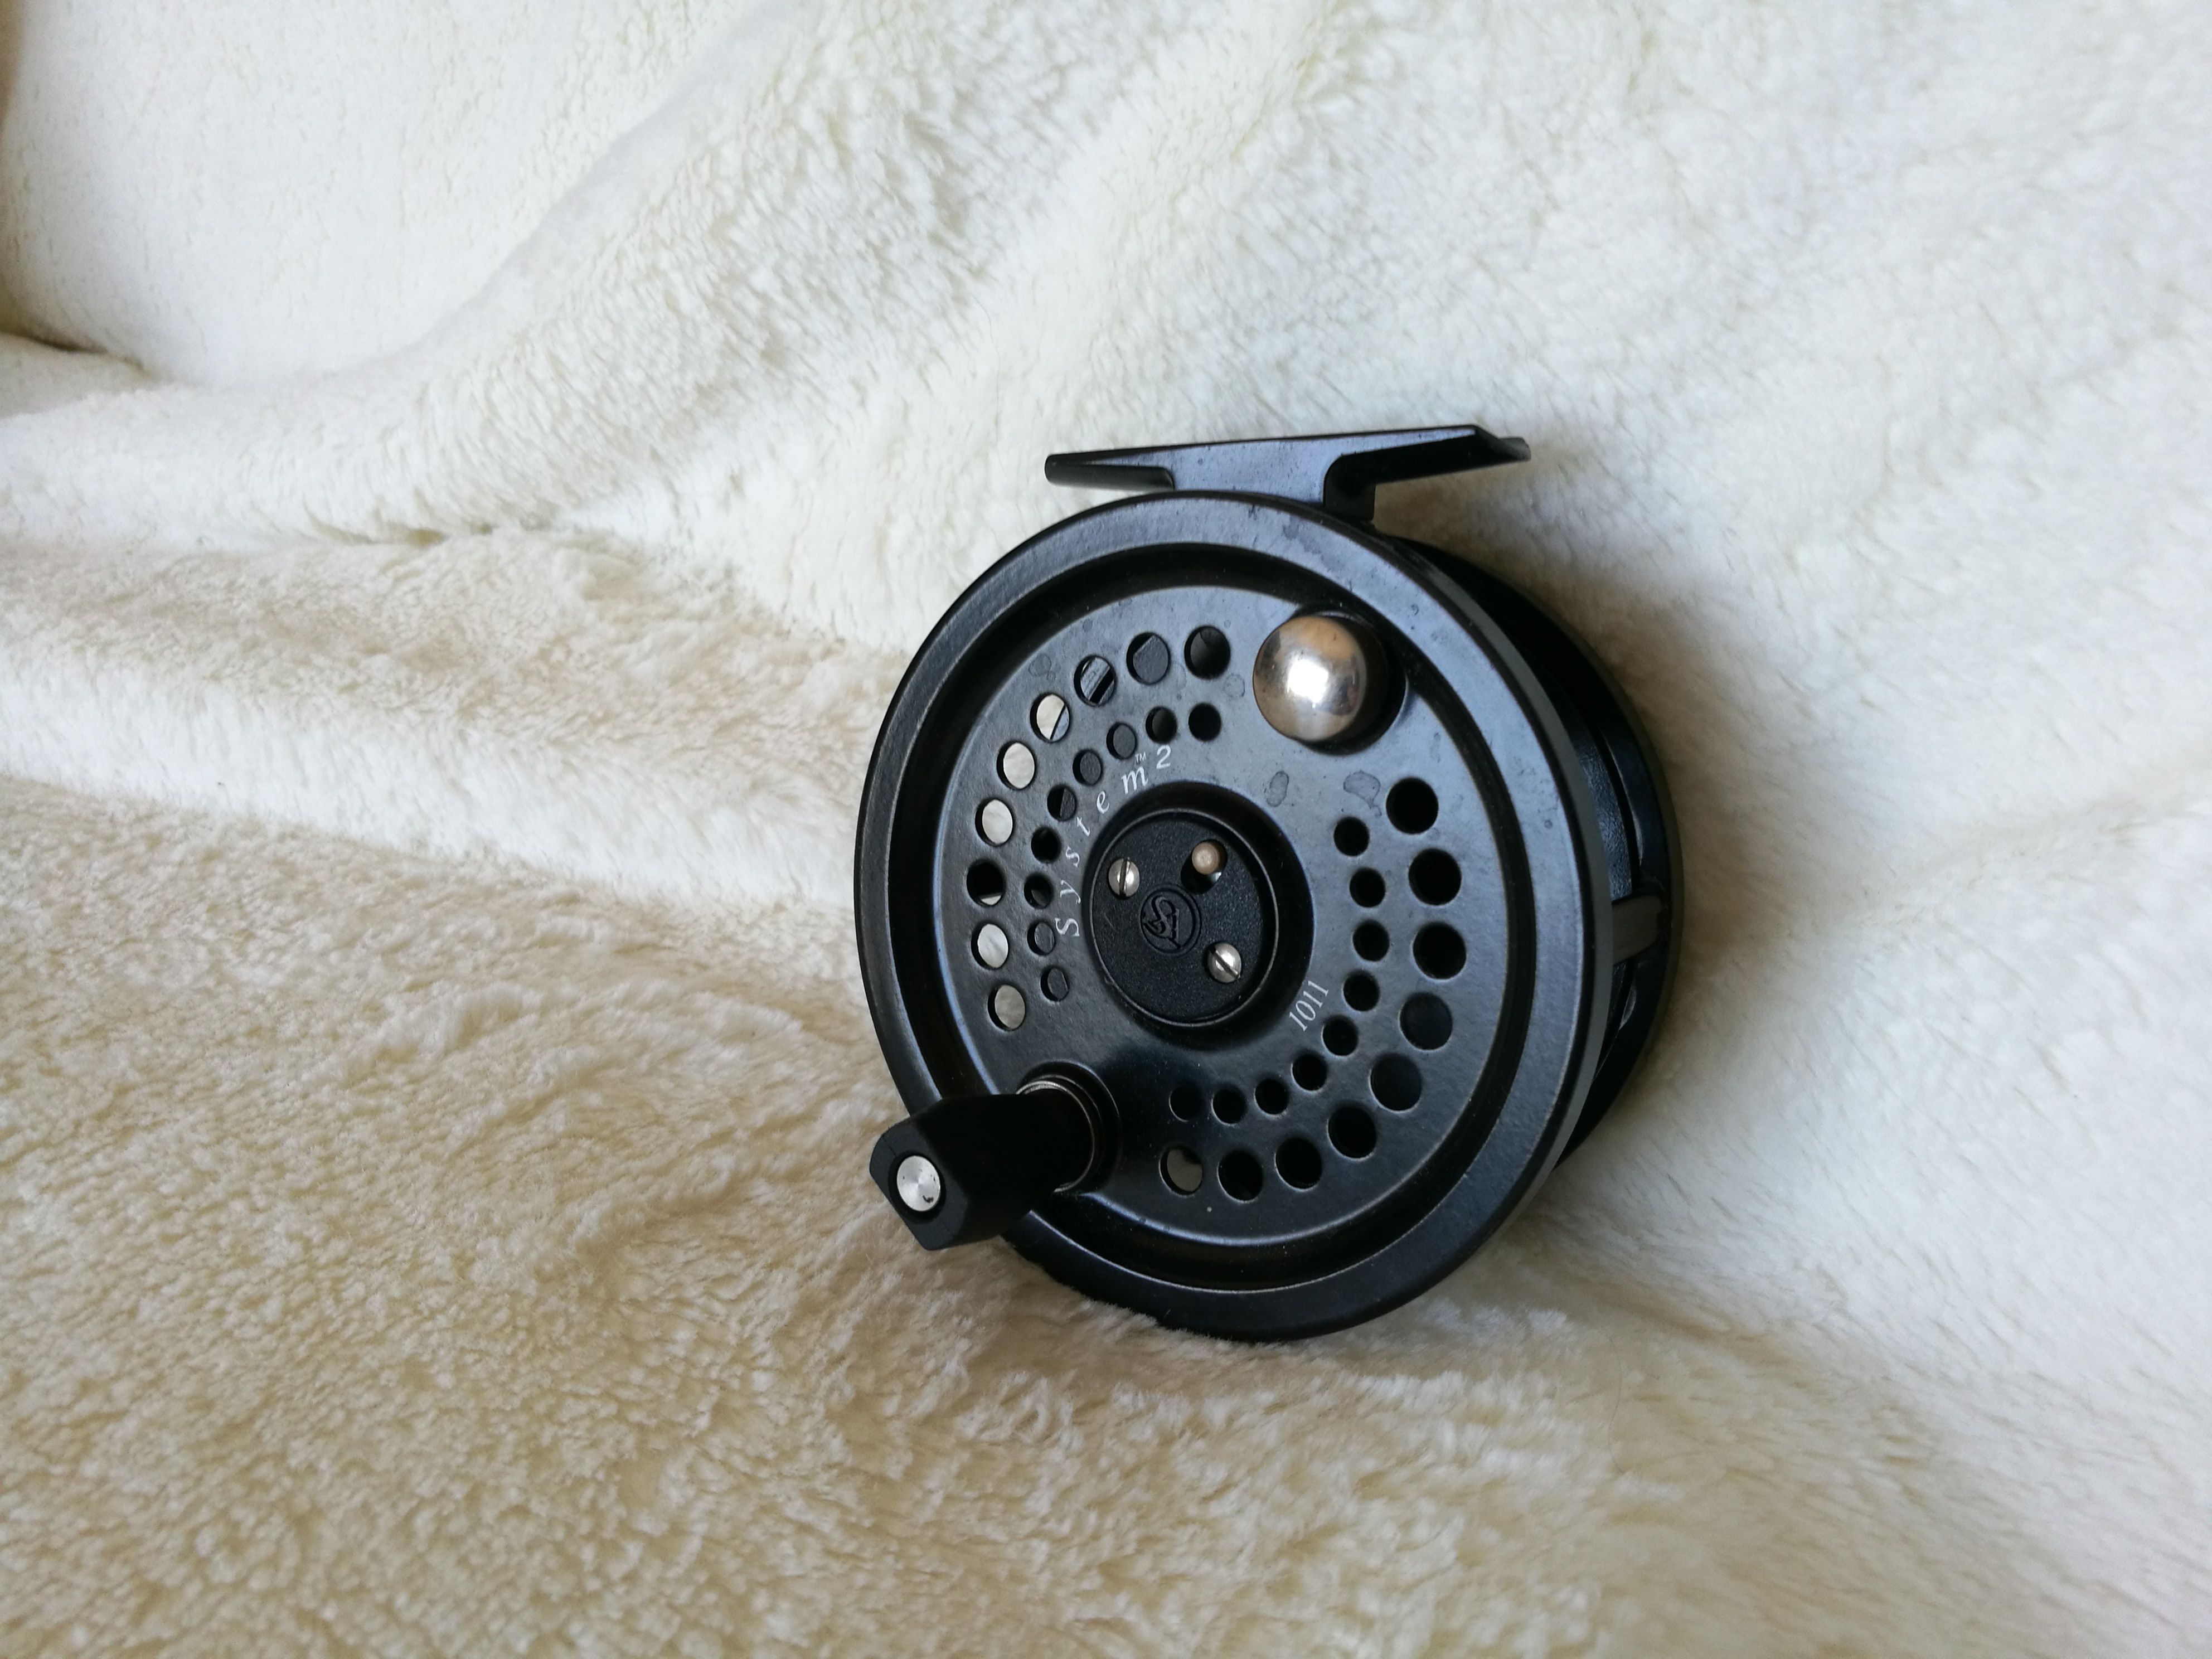 System 2 fly fishing reel